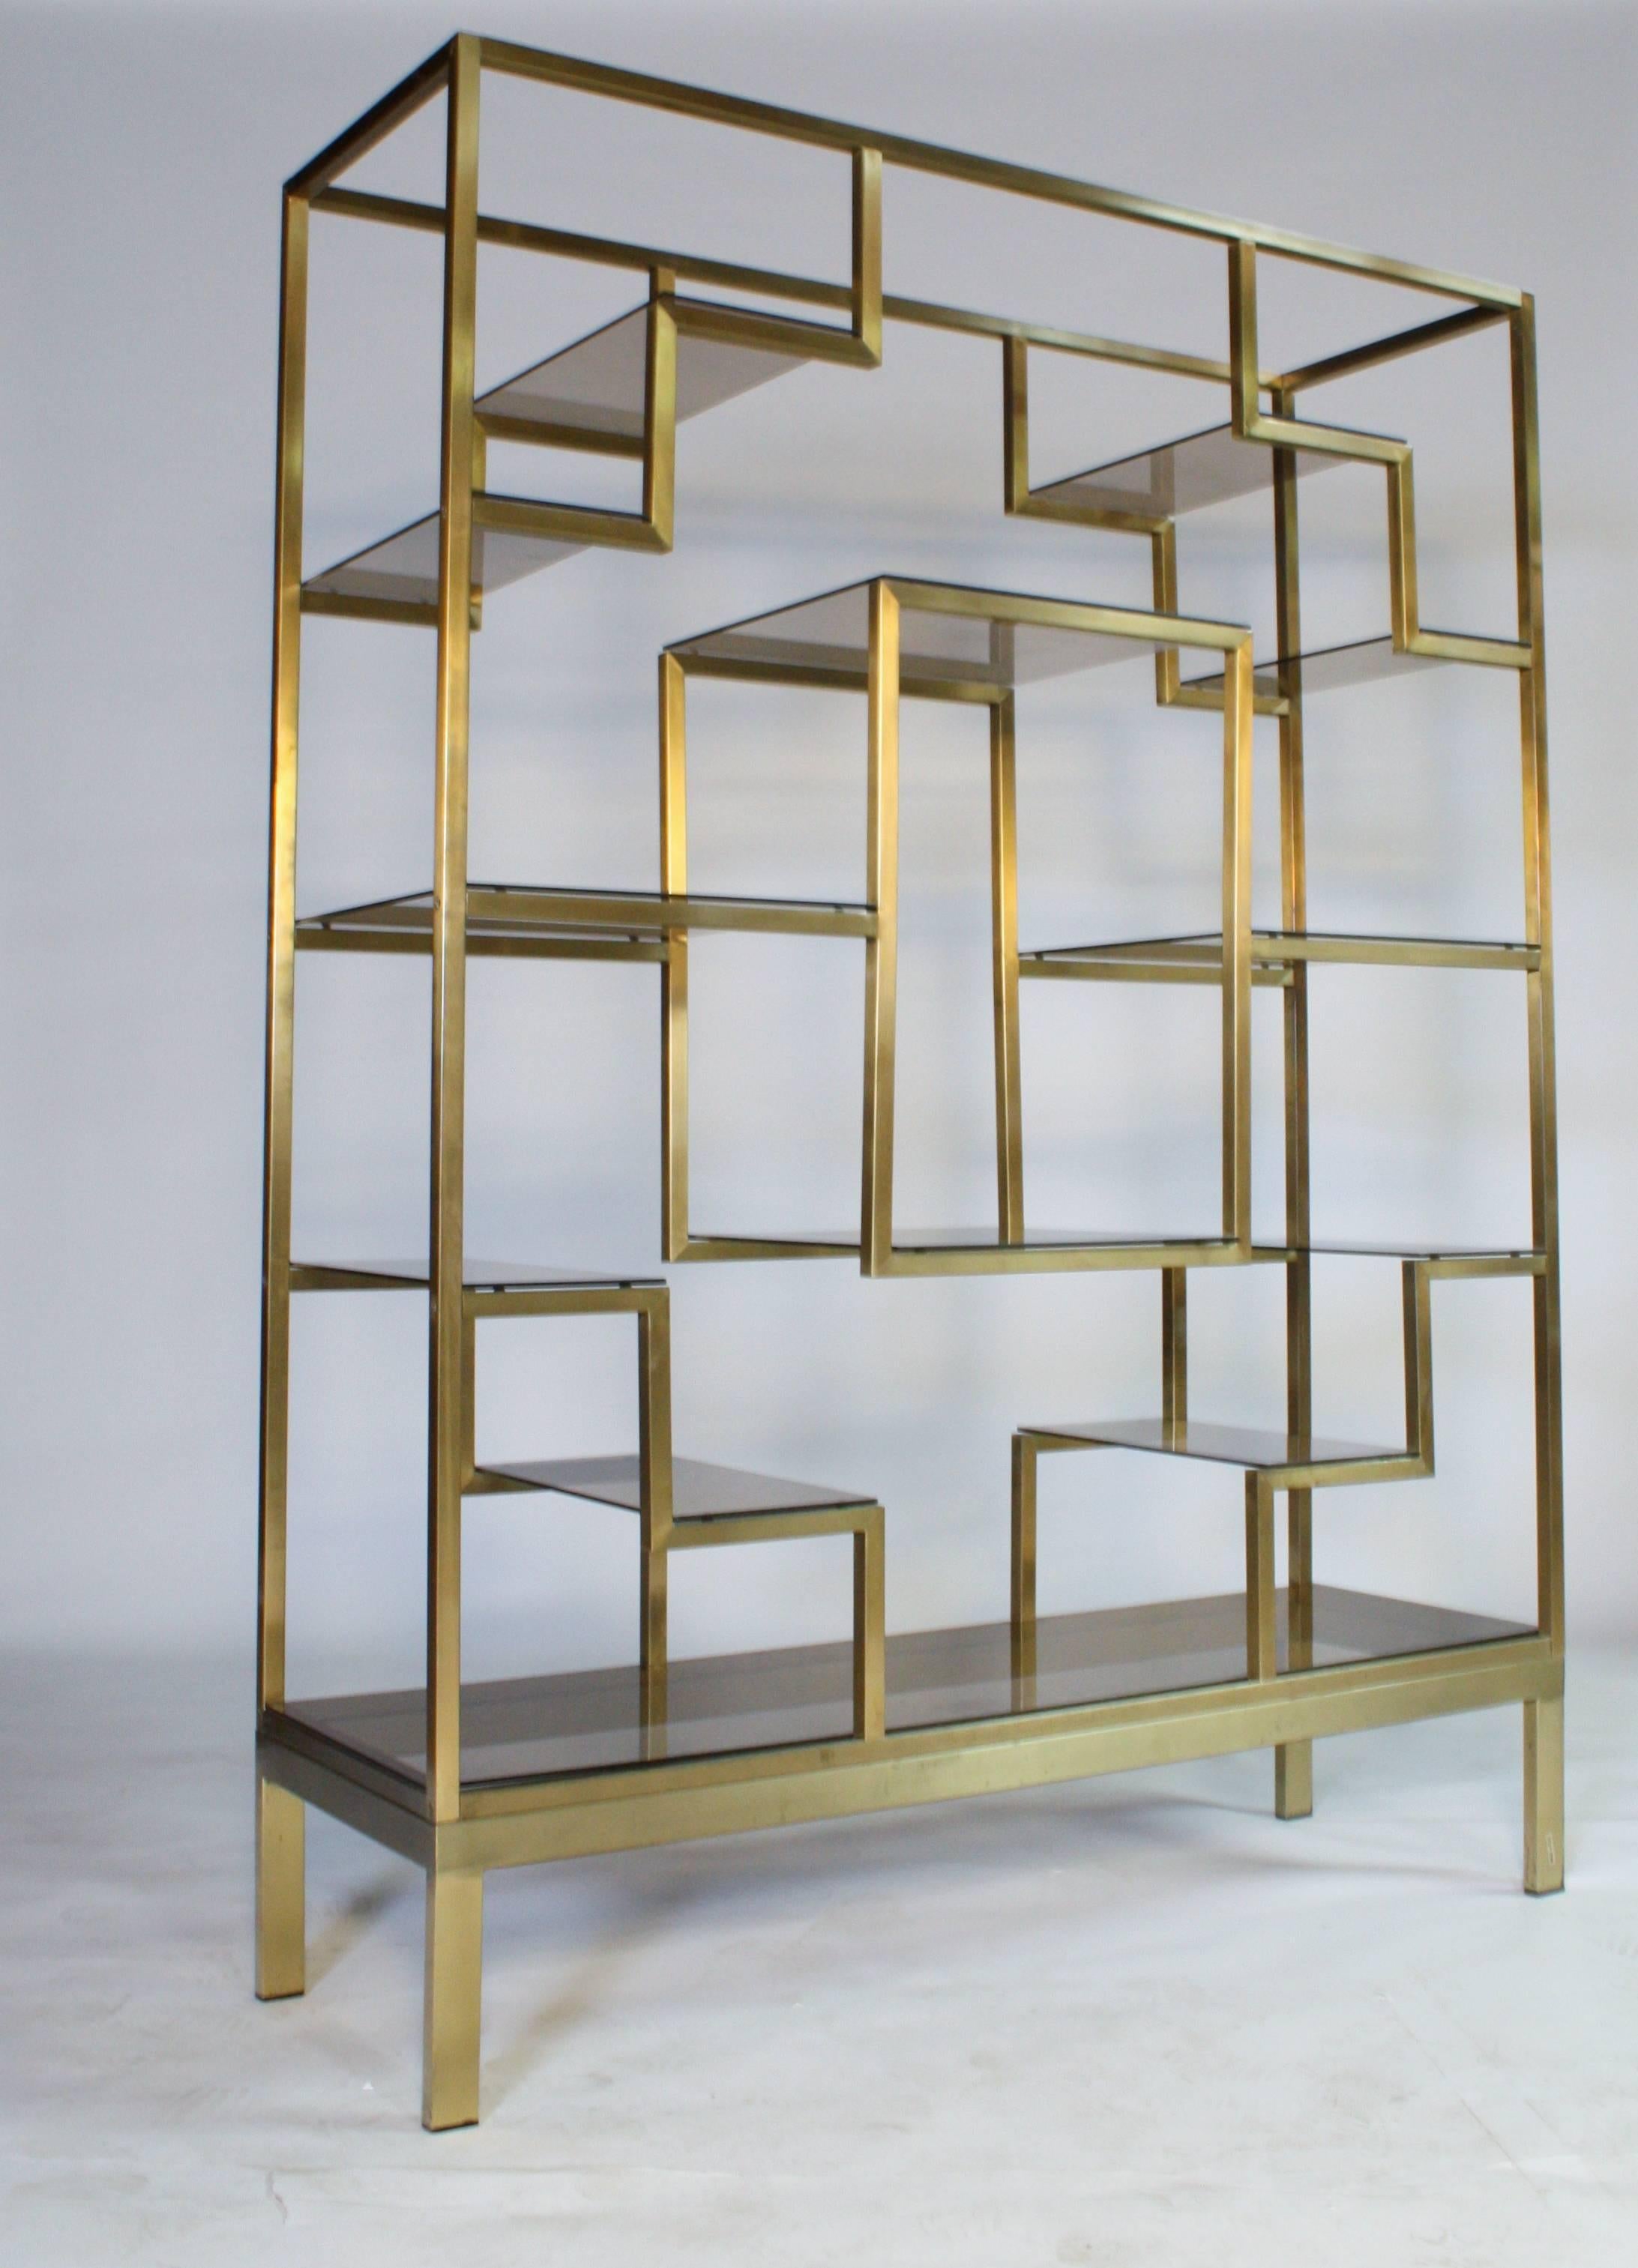 Brass and smoke glass etagere in a beautiful brushed gold finish attributed to Romeo Rega made in Italy (labelled). 13 glass shelves all in excellent condition with the exception of one small flea bite on the bottom shelf (barely noticeable).